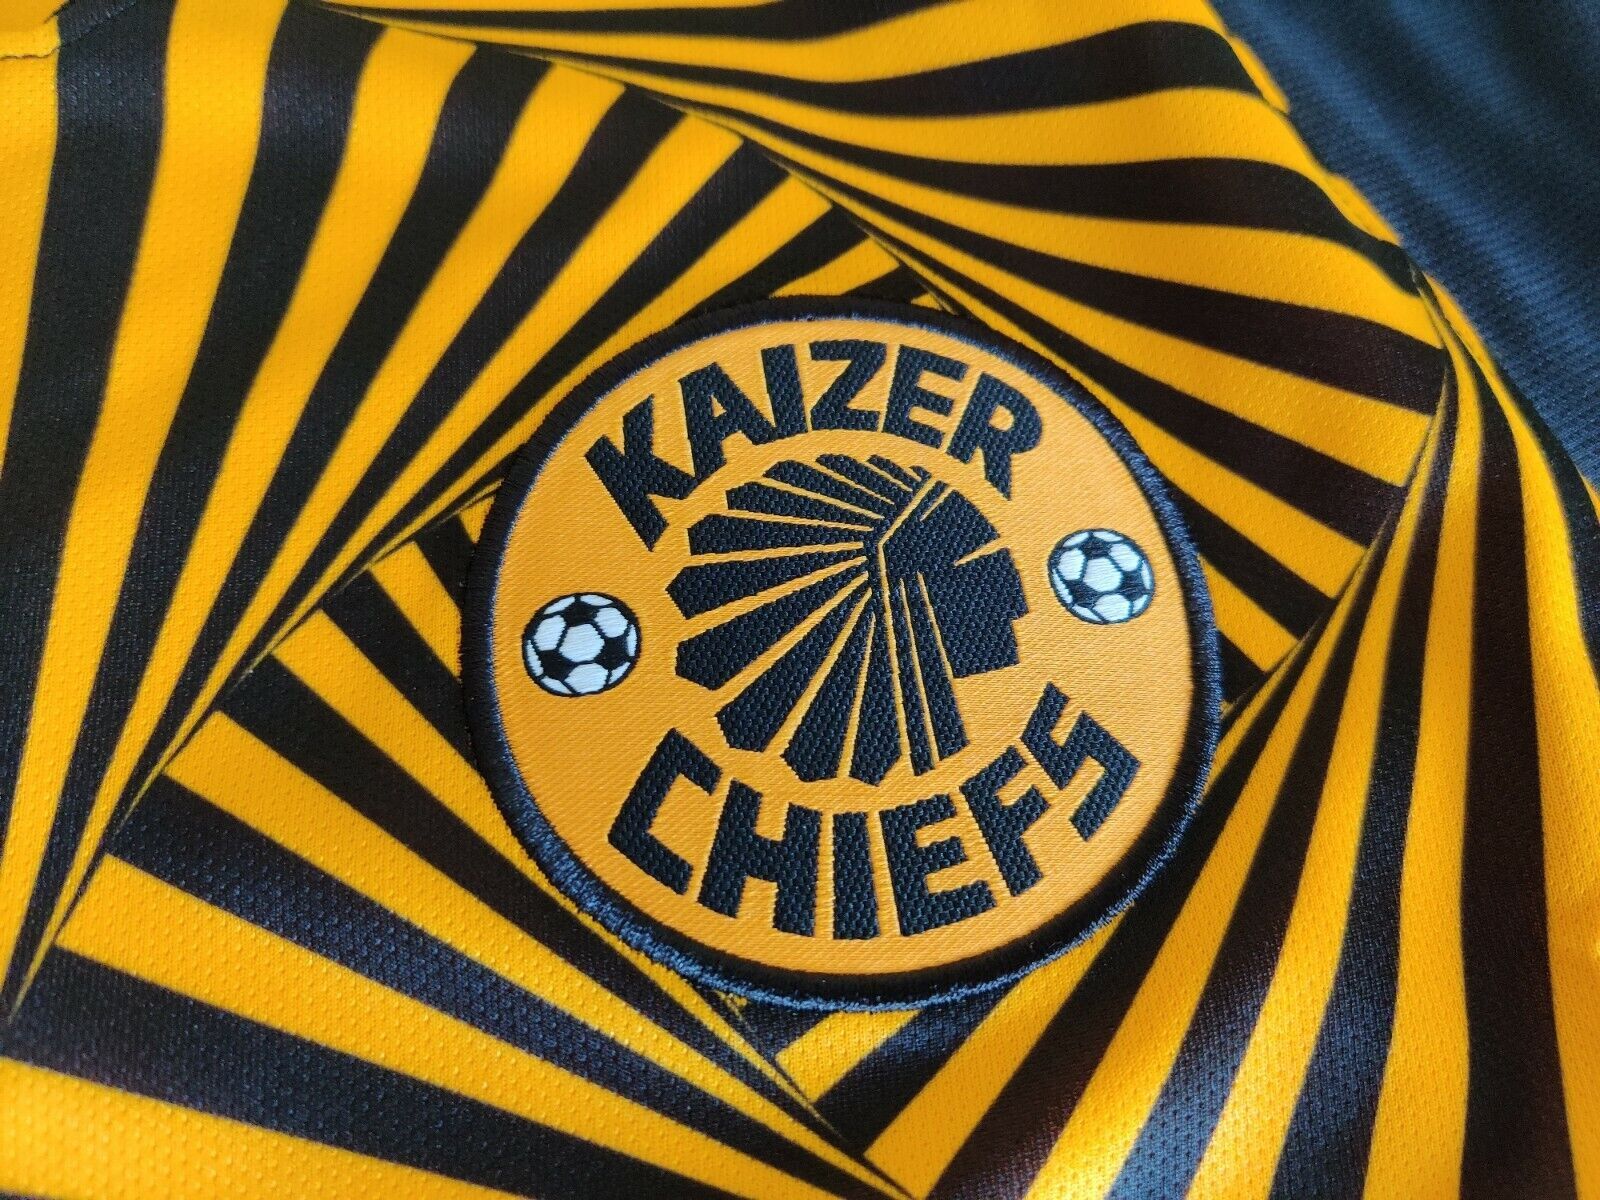 Kaizer Chiefs Wallpapers - Top Free Kaizer Chiefs Backgrounds ...